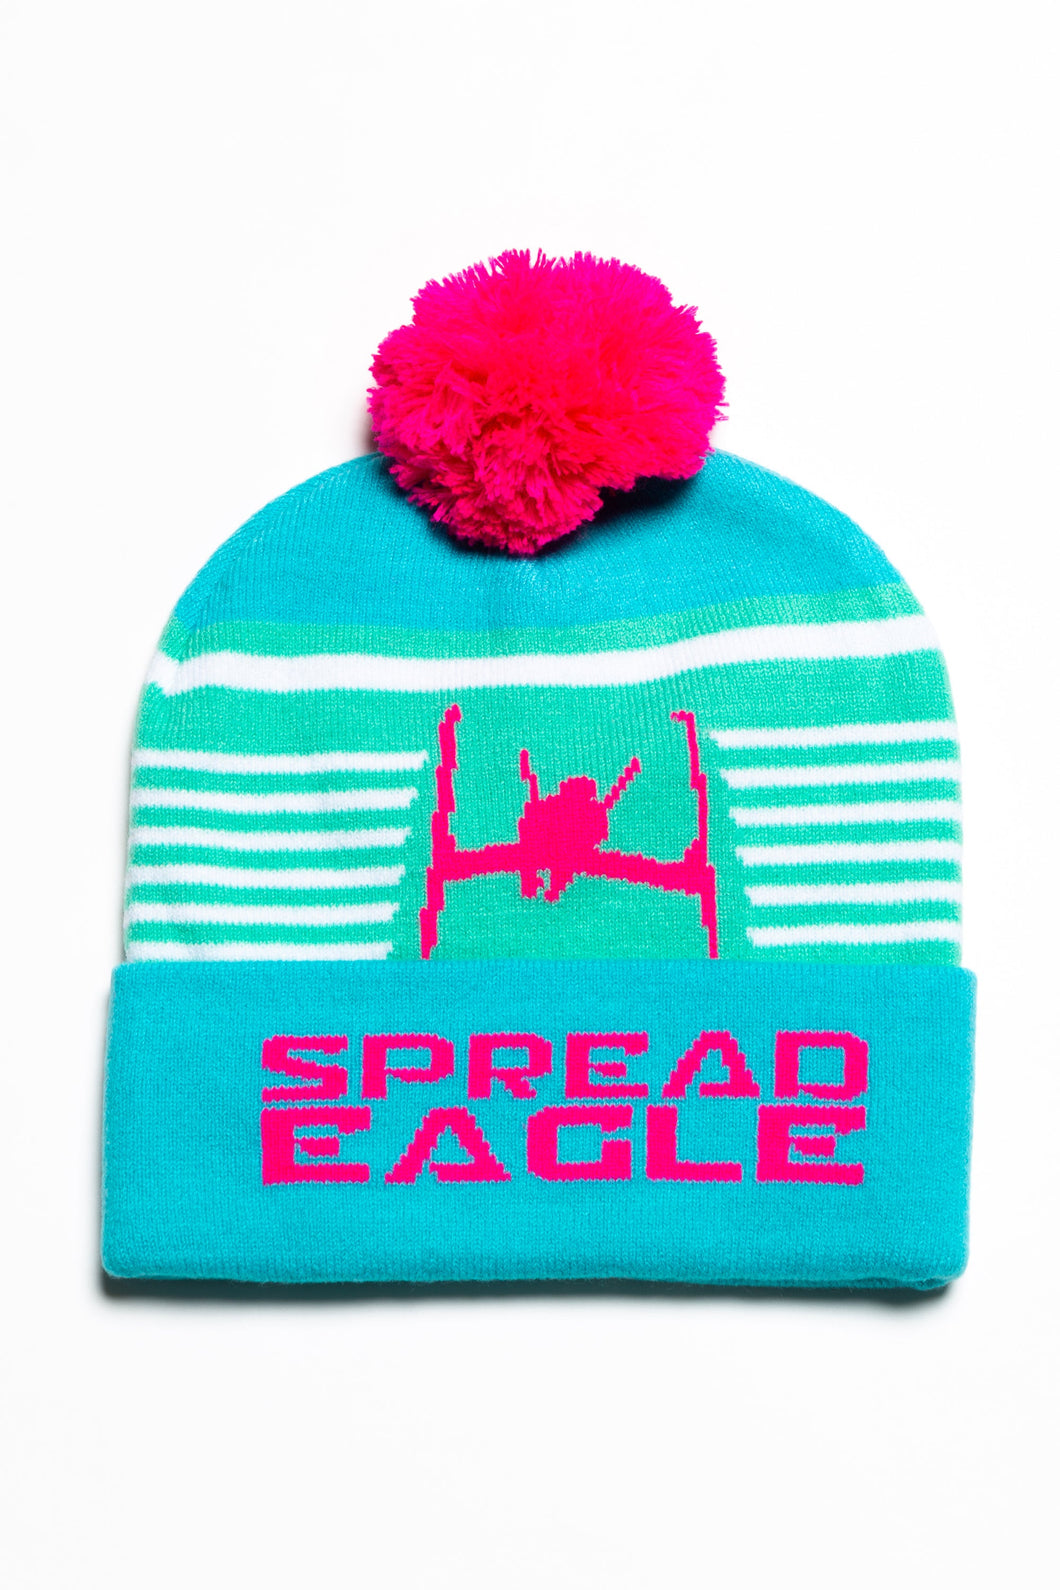 Chairlift Chiefer Neon Ski Beanie